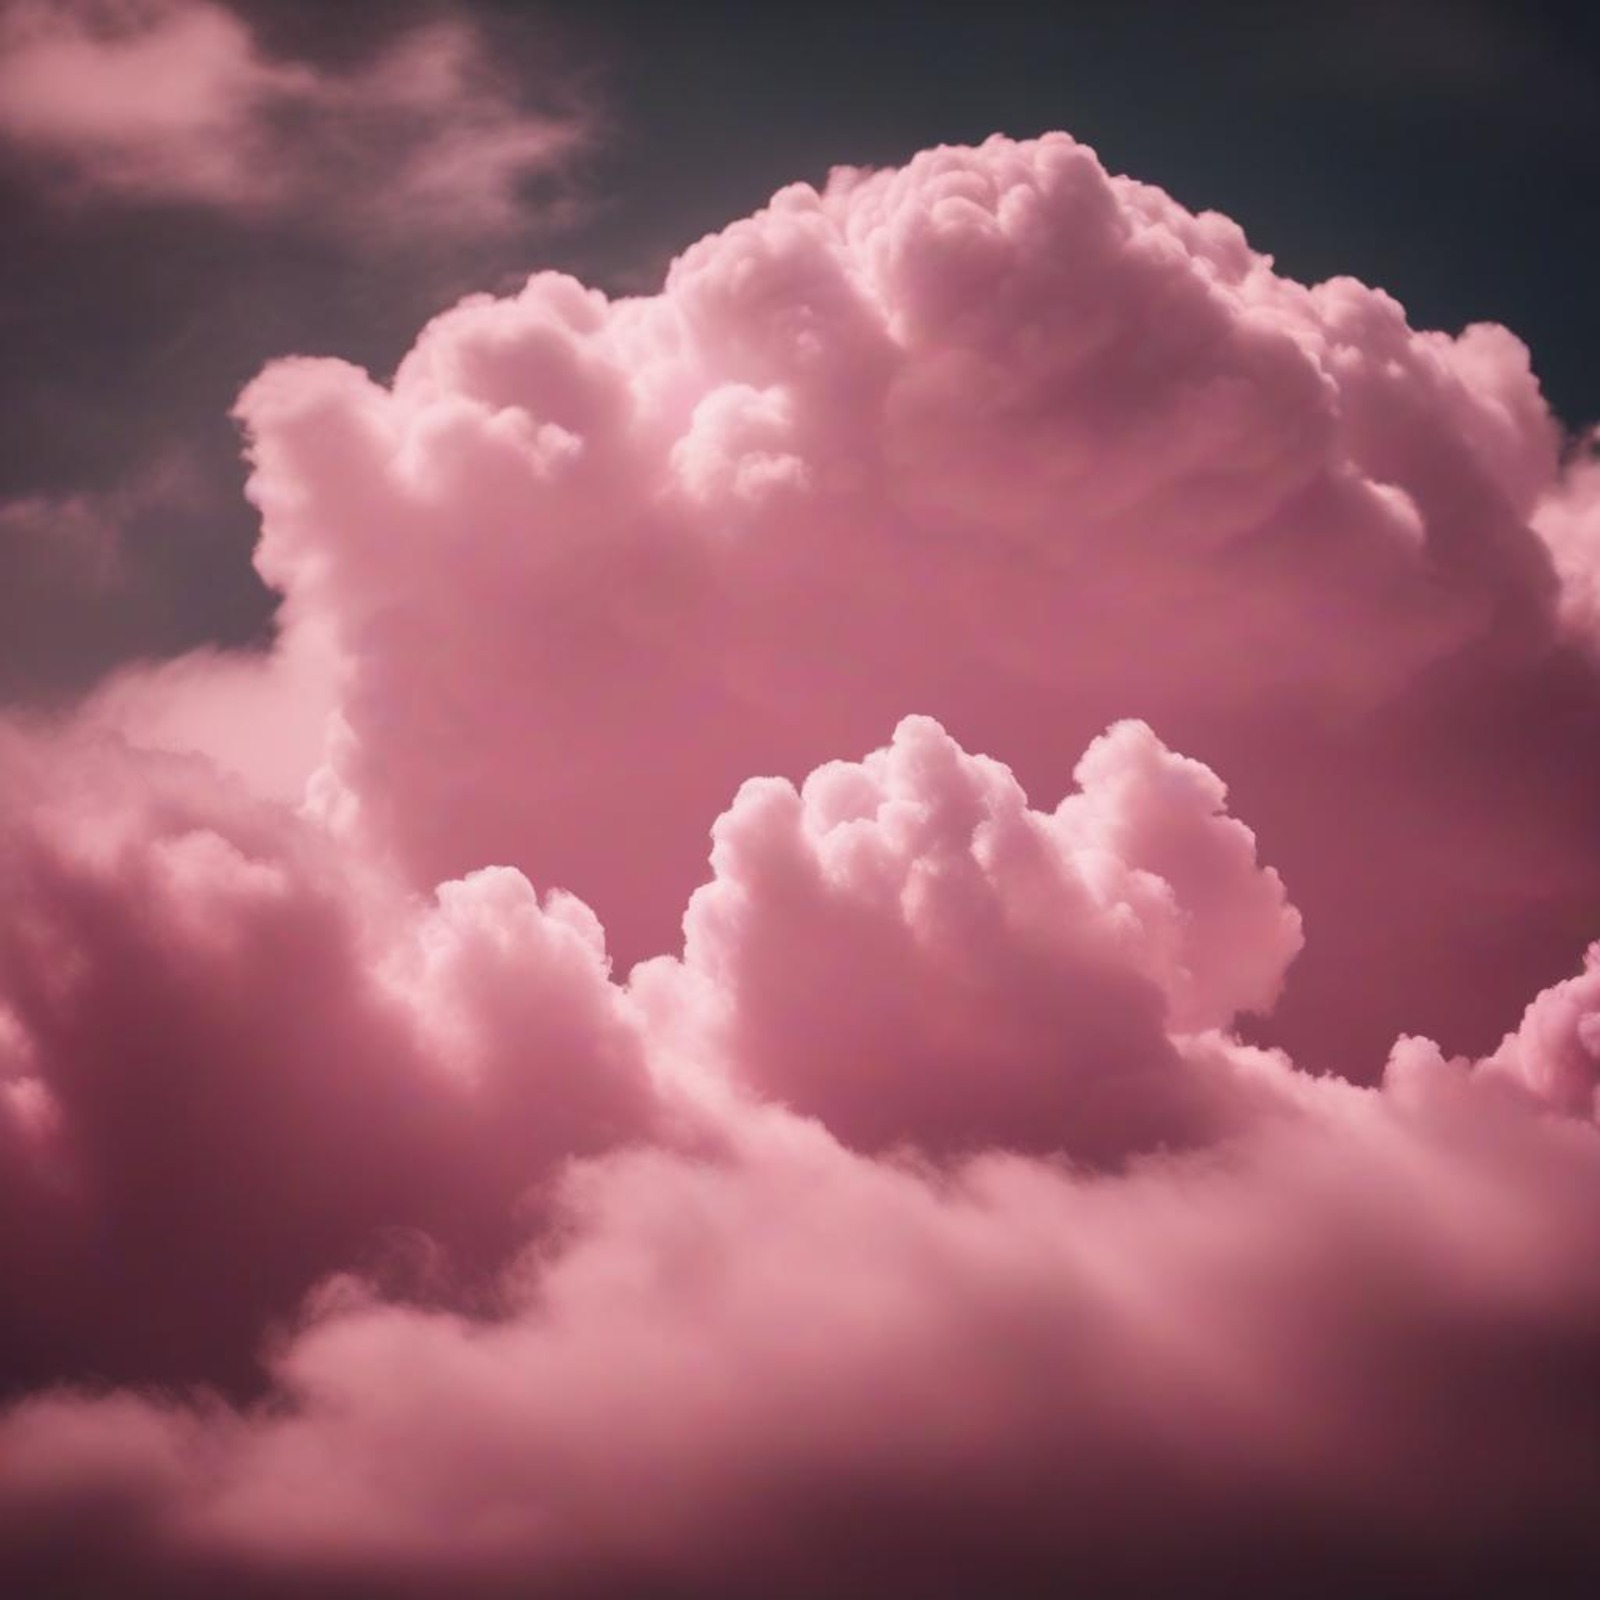 Pink Cloud: What Does It Mean in Recovery?